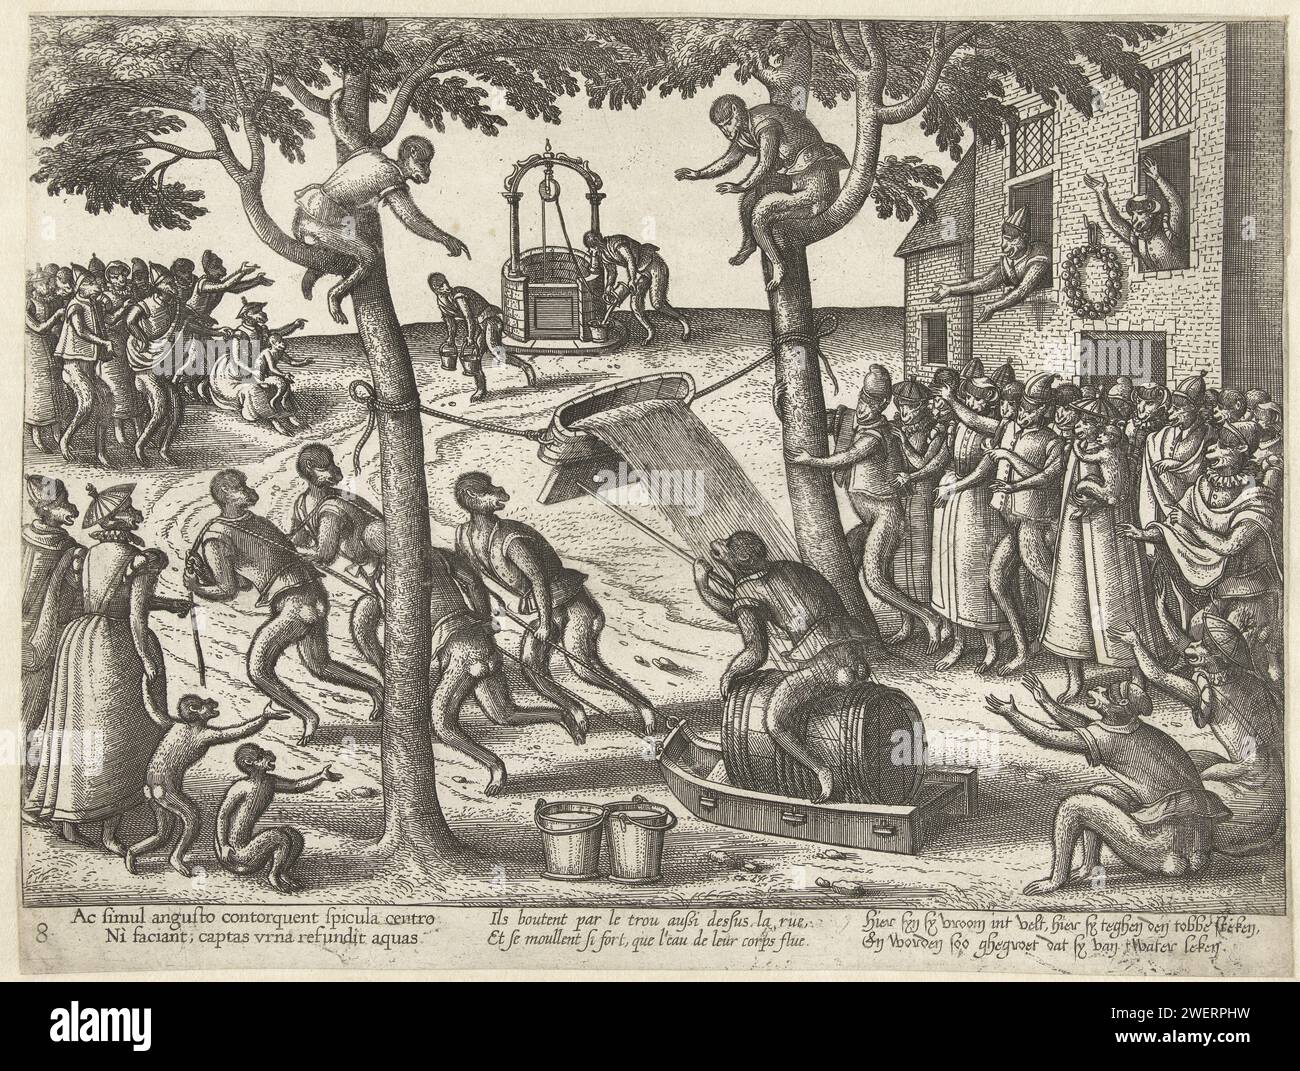 Tobbespel, Pieter van der Borcht (I), 1545 - 1608 print The print shows a folk entertainment from the 16th century: tub game or tub stitches. The game is played by monkeys. A tub filled with water is hung between two trees. Pulled on a ton of trying to put young people with a lance by putting a hole in the Tobbe. Who is successful does not get wet. A crowd welcomes a young monkey while he dares his chance. His attempt failed and the full tobbe with water tilts over him. A caption of two lines in French, the Netherlands and Latin.  paper etching tilting at the ring ( games of skill). drumming- Stock Photo